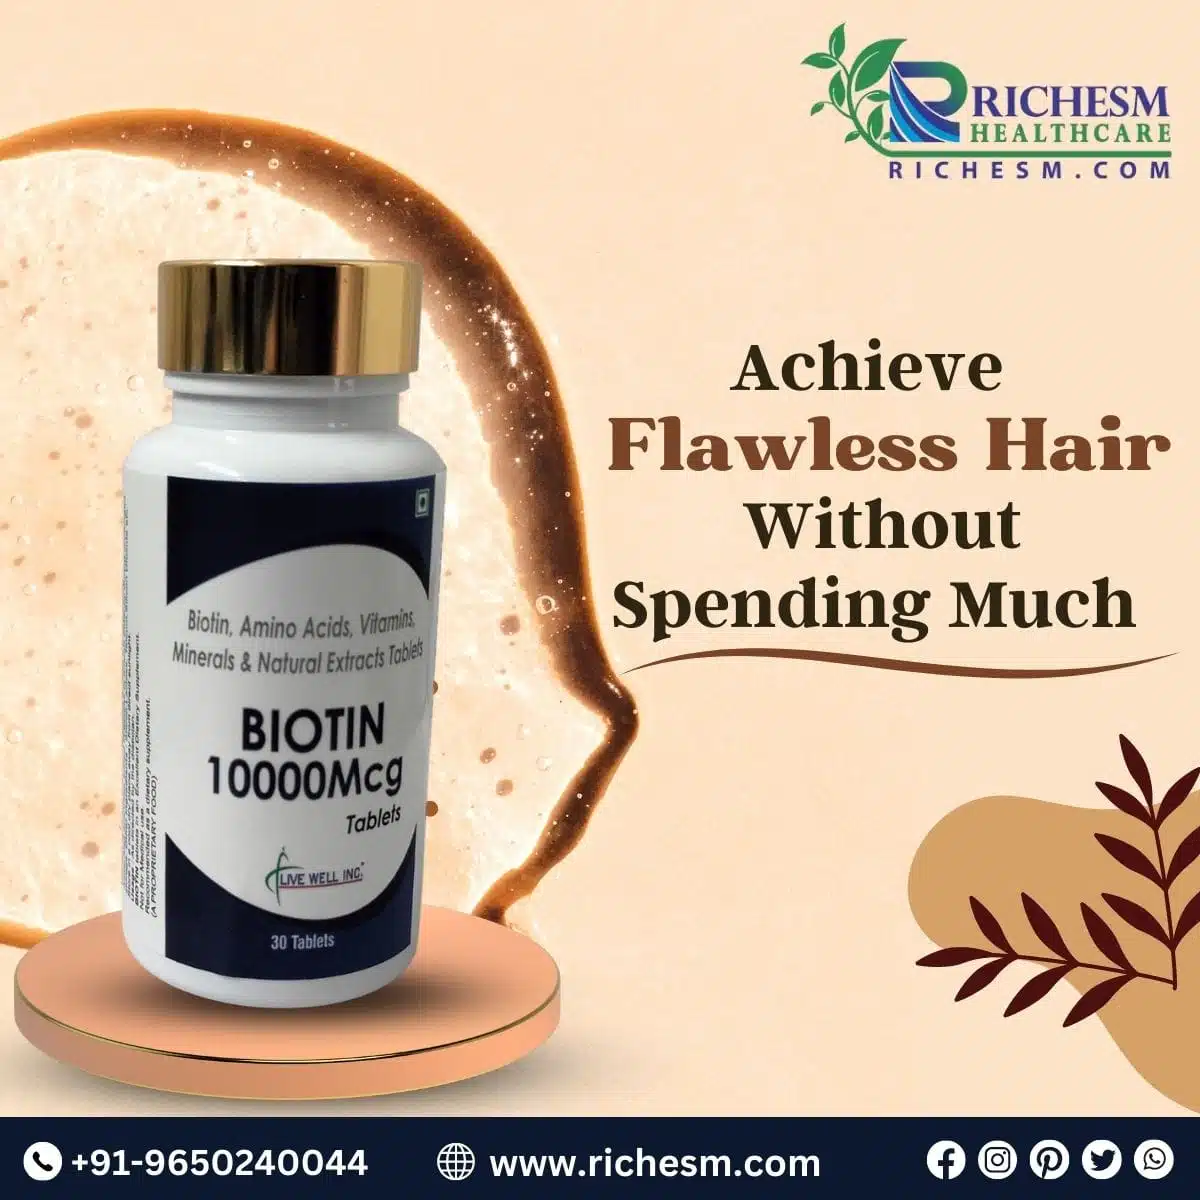 Buy Biotin 10000 Mcg Tablets For Your Hair RichesM